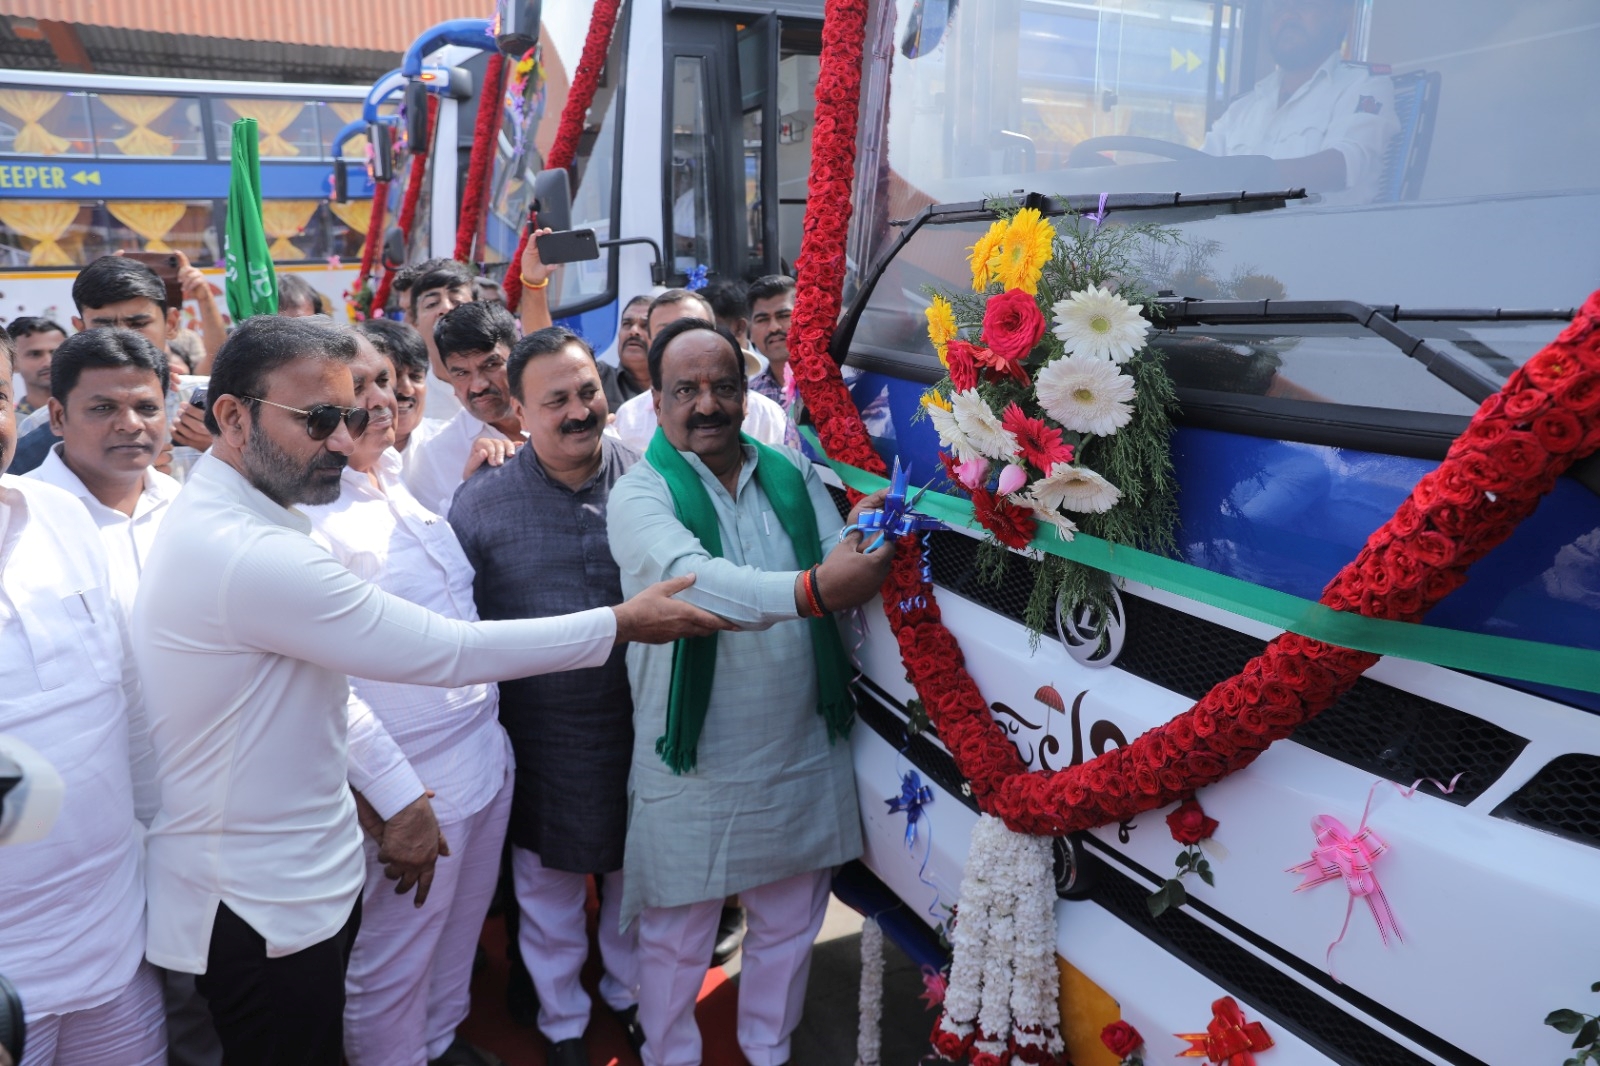 transport-department-will-provide-new-buses-for-nwkrtc-says-minister-ramalinga-reddy